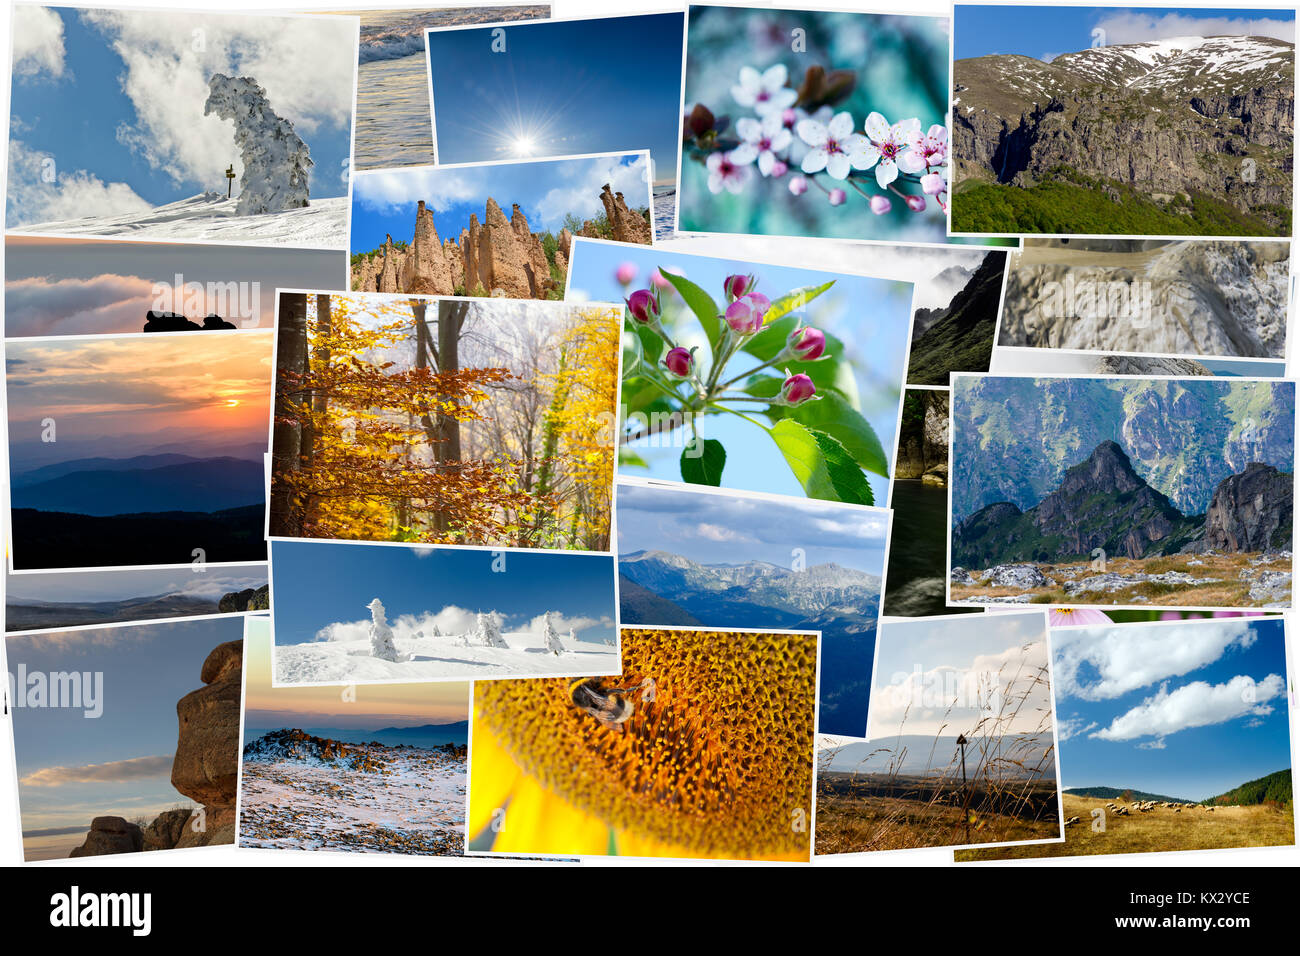 Collage of various nature photos in different seasons Stock Photo